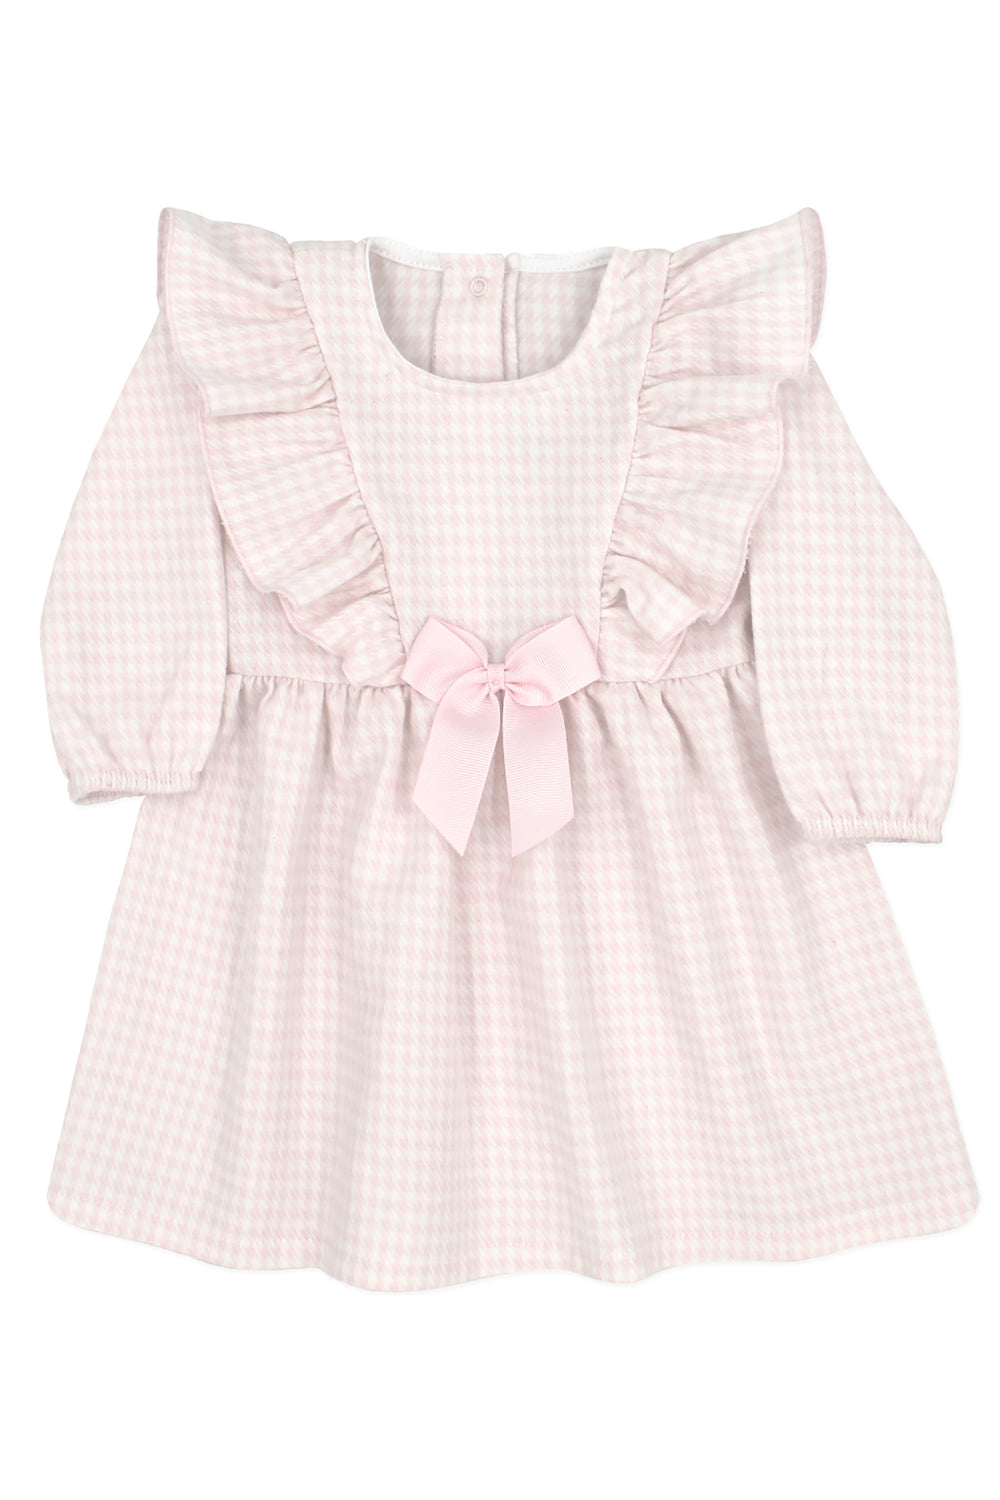 Rapife "Coraline" Pink Houndstooth Dress | Millie and John